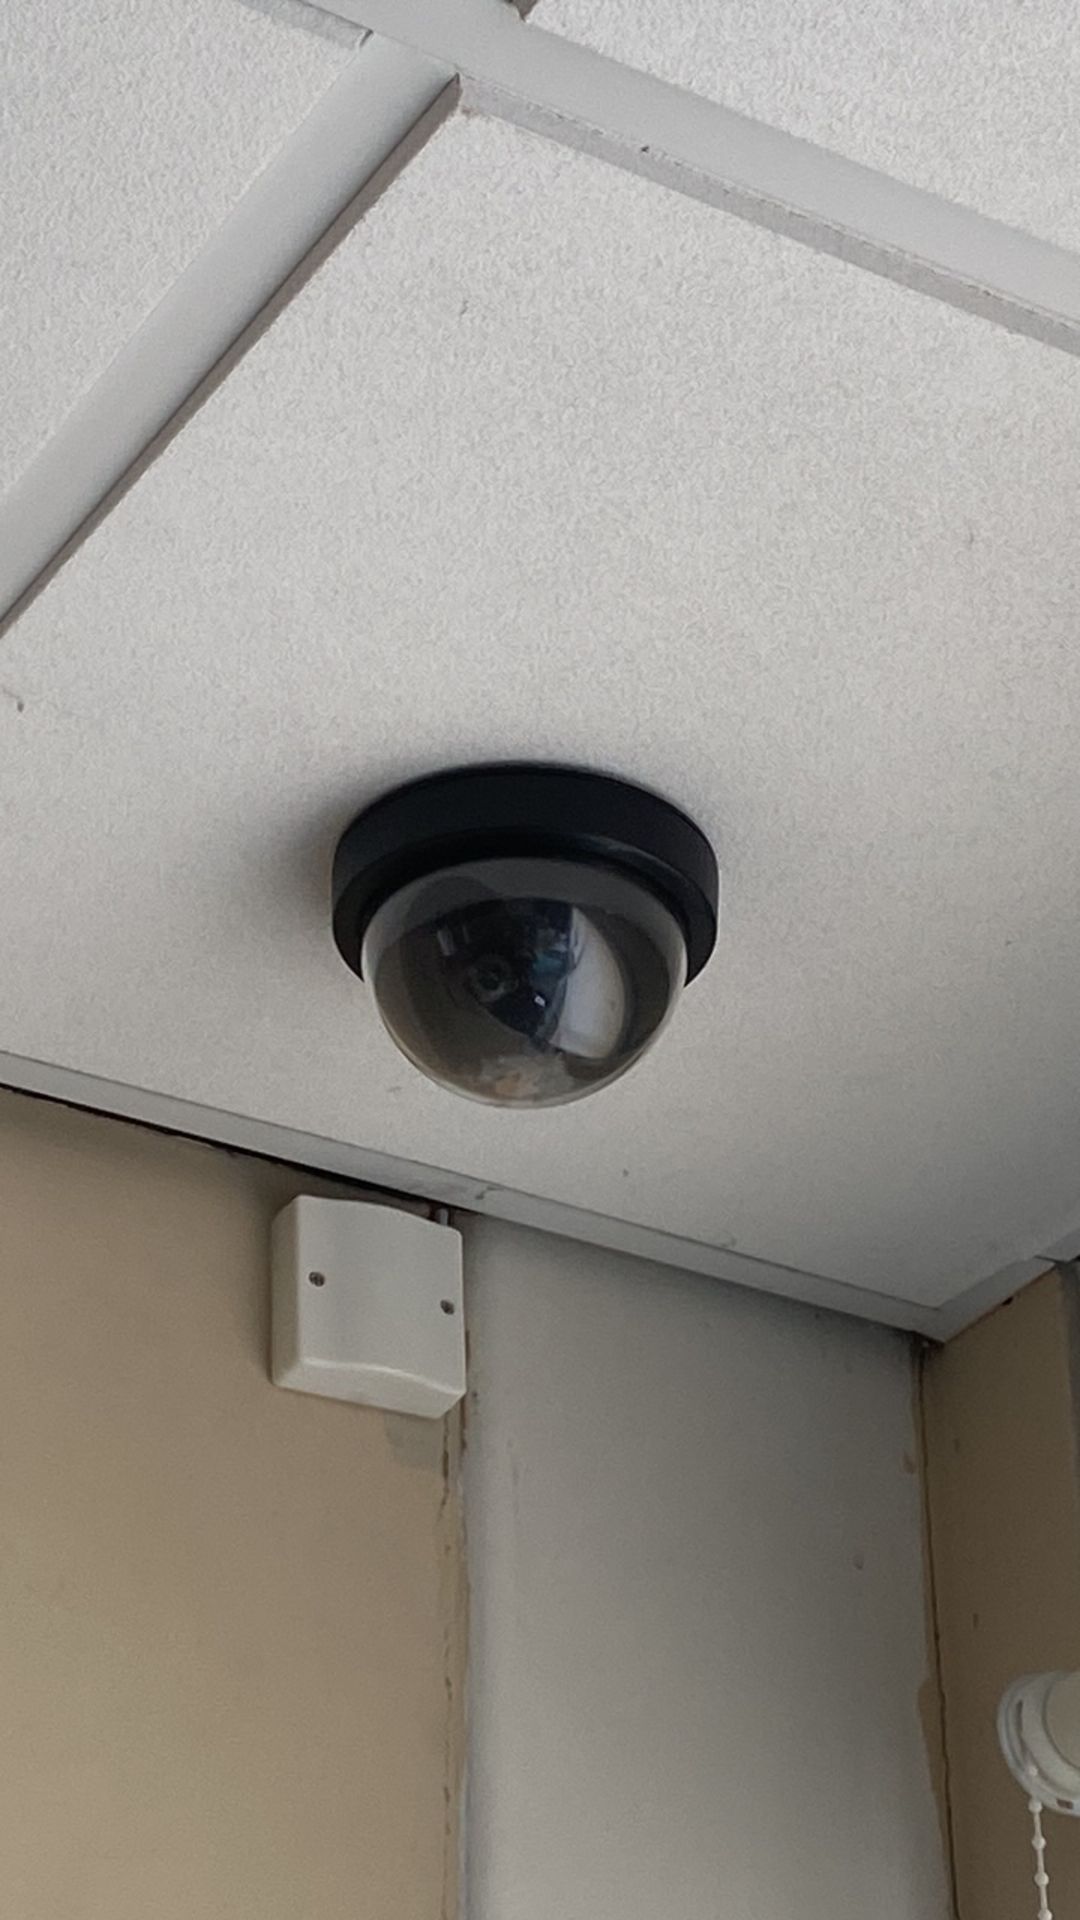 Security Camera X9 - Image 5 of 5